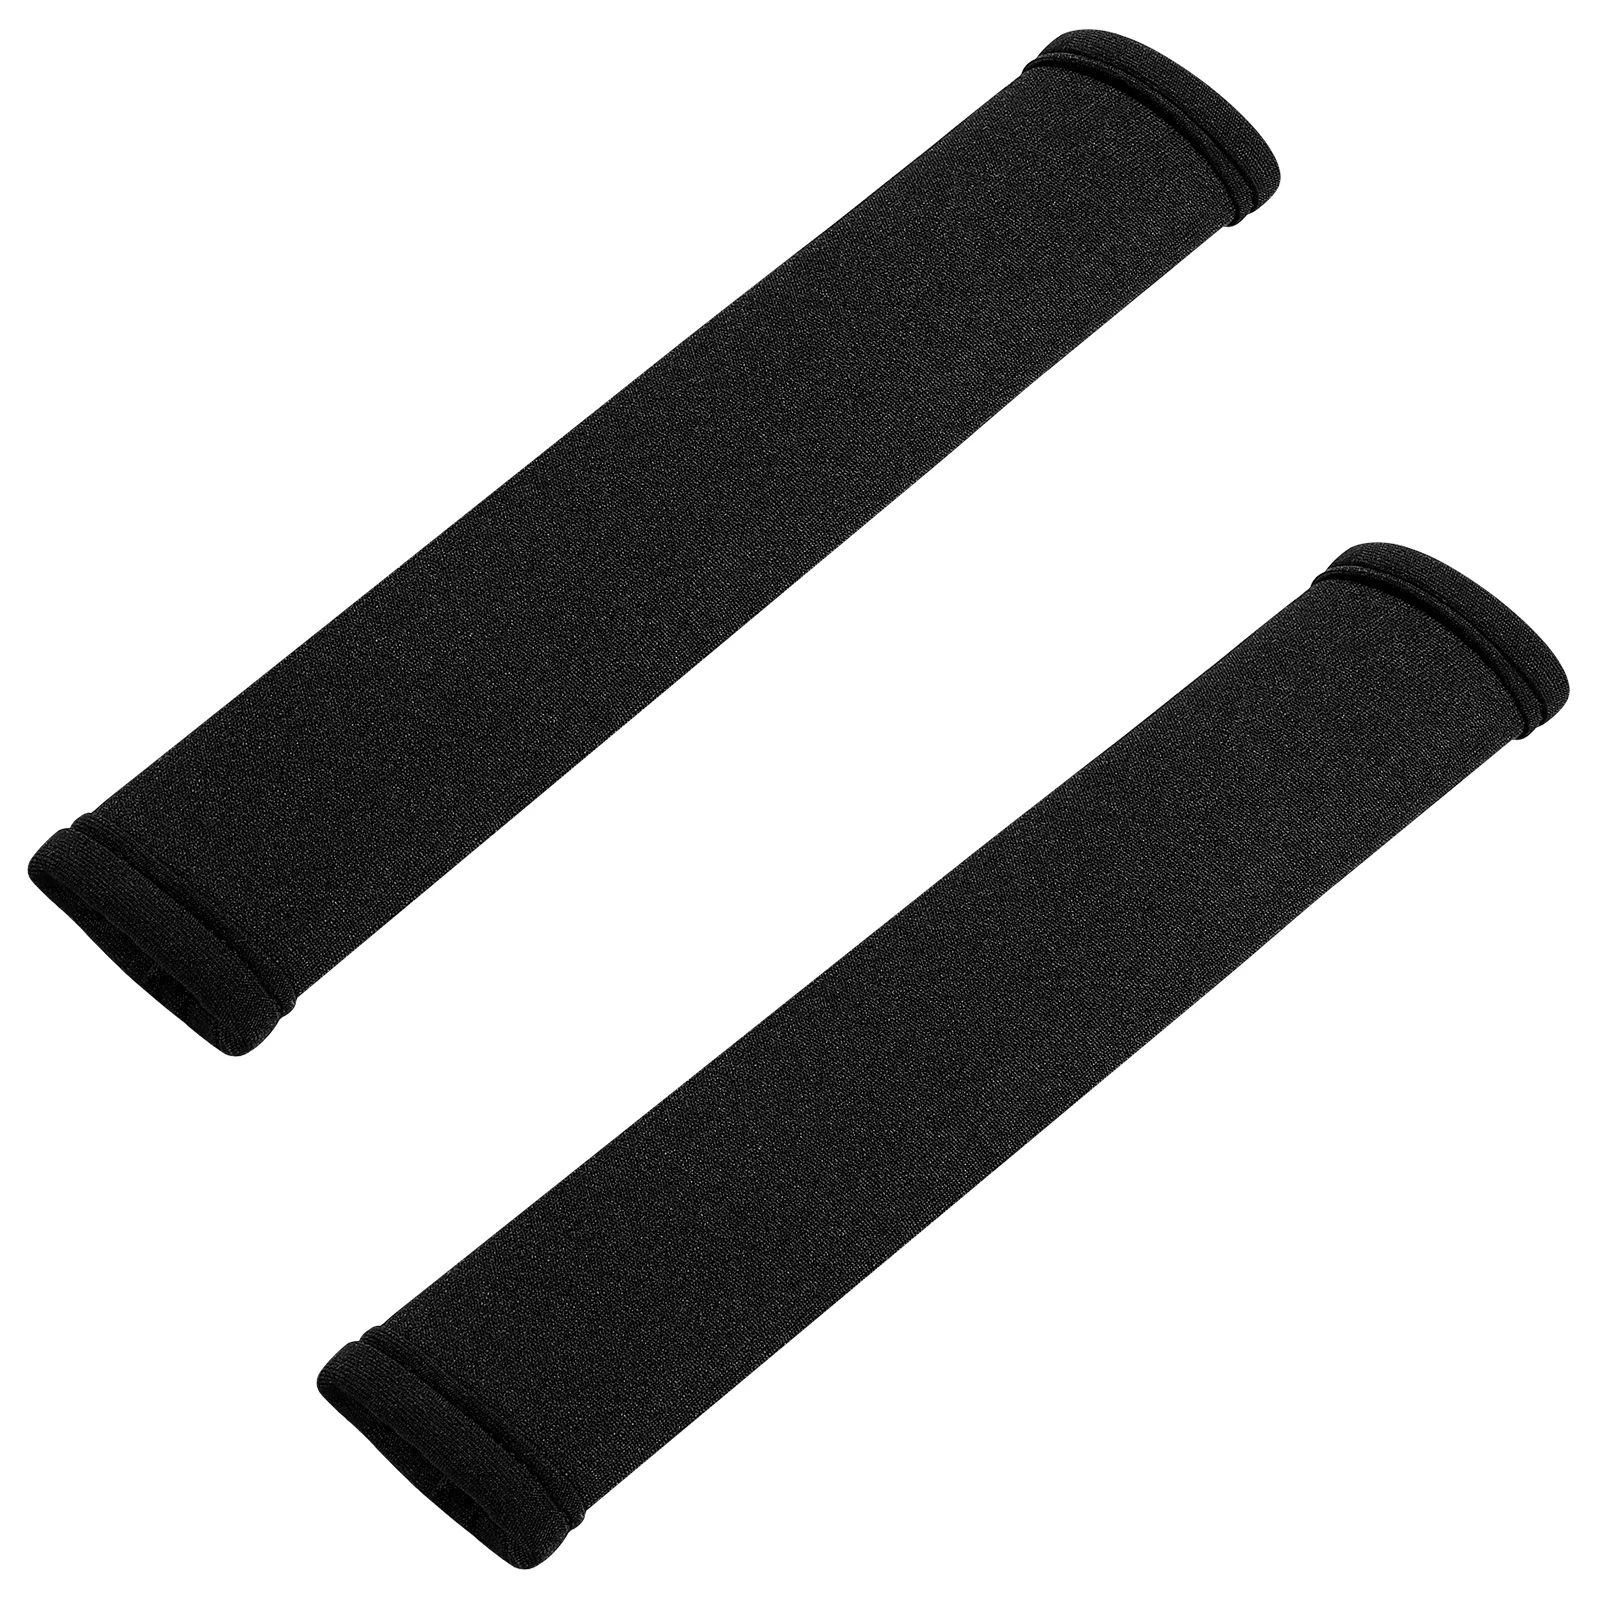 

LIOOBO 1 Pair Kayak Paddle Grips Non-Slip Blister Prevention Paddle Handle Cover Kayaking Accessories